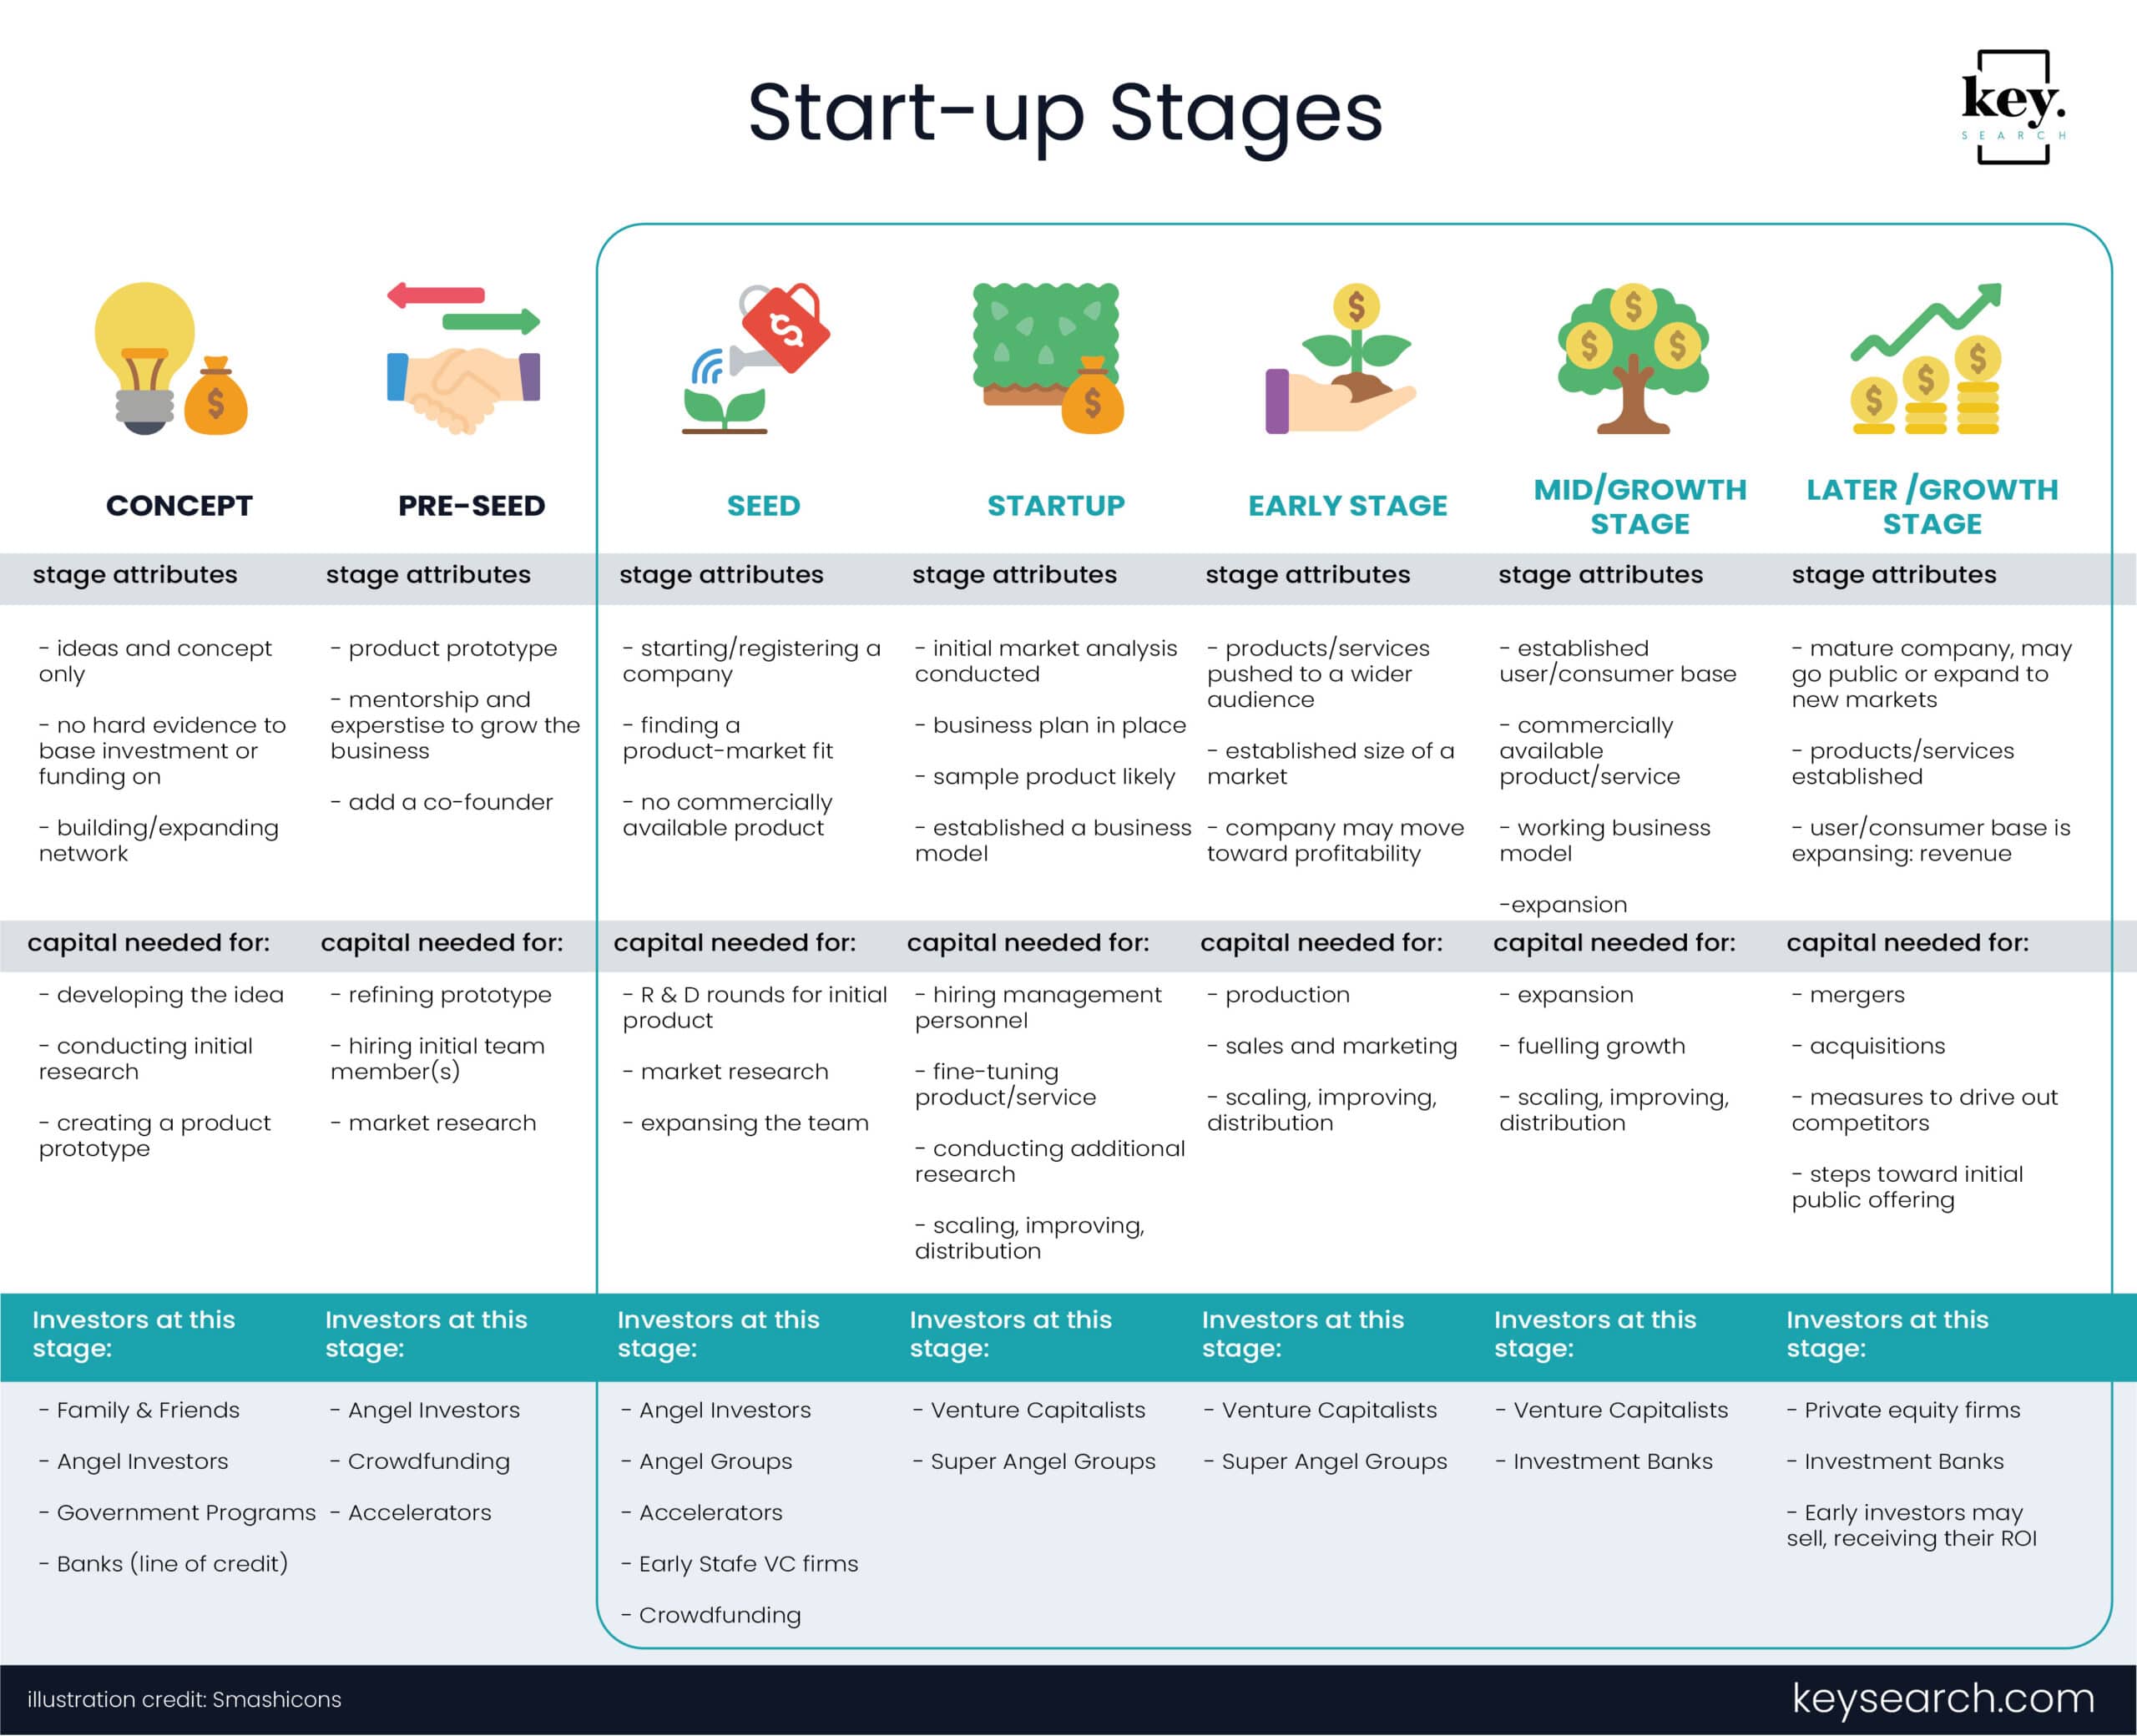 startup-stages-later-stage